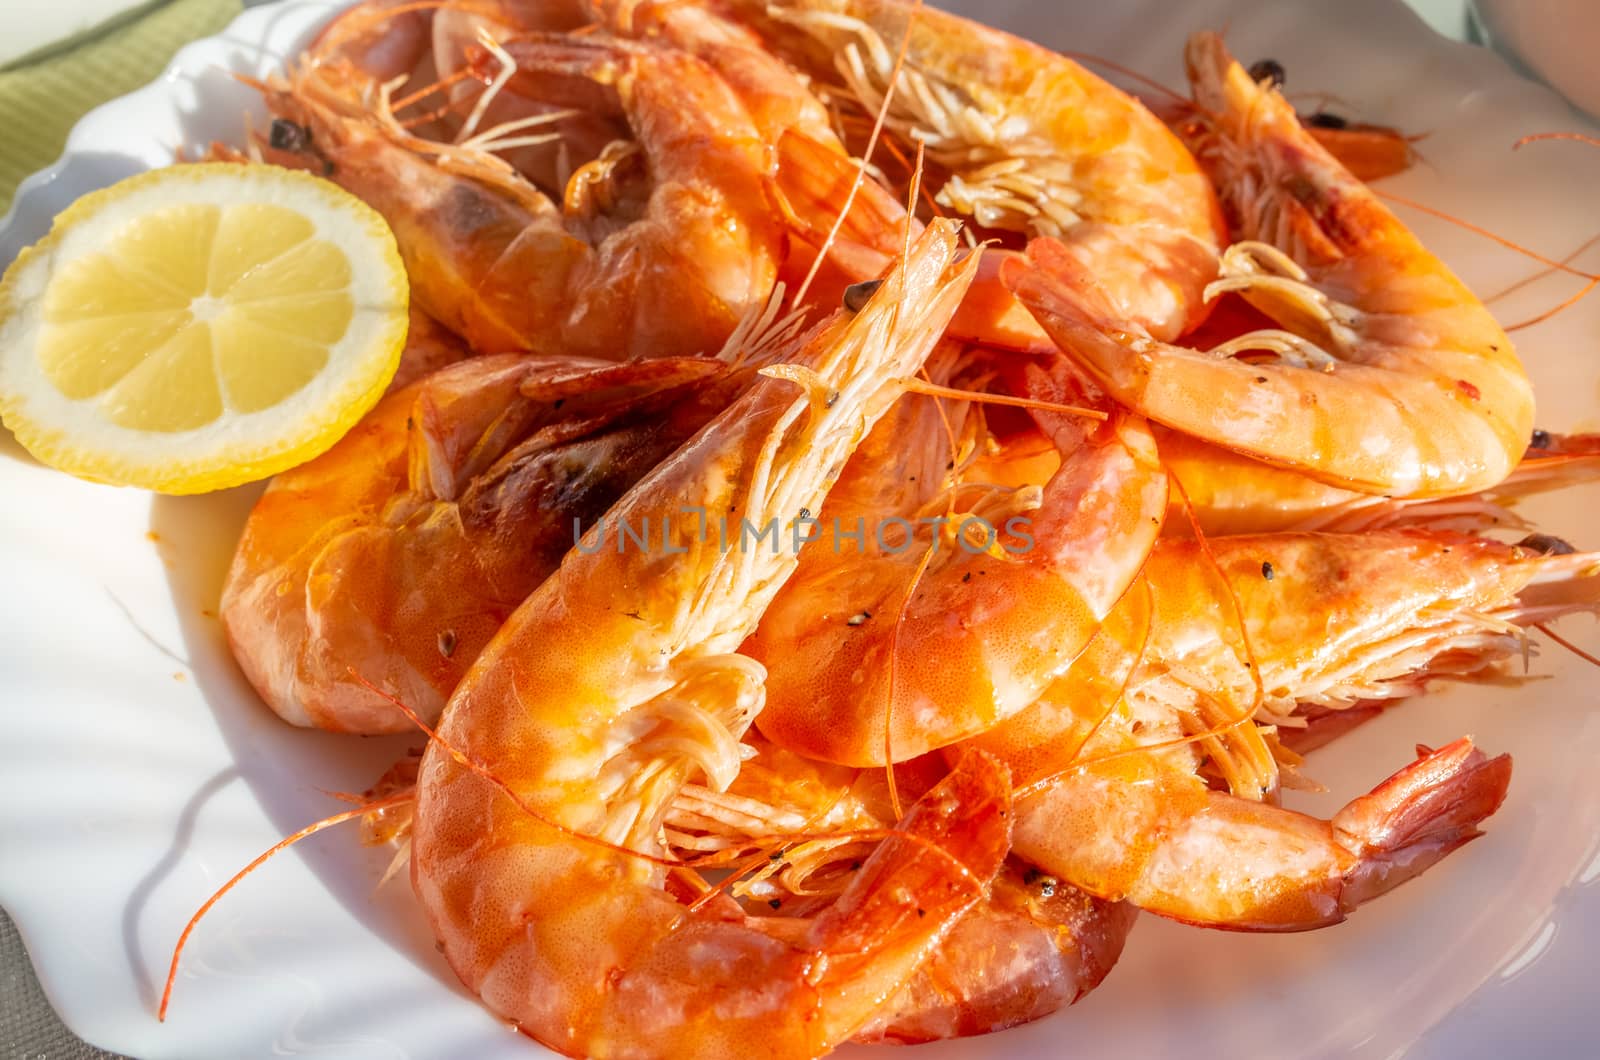 A plate of fried fresh king prawns with a slice of lemon.